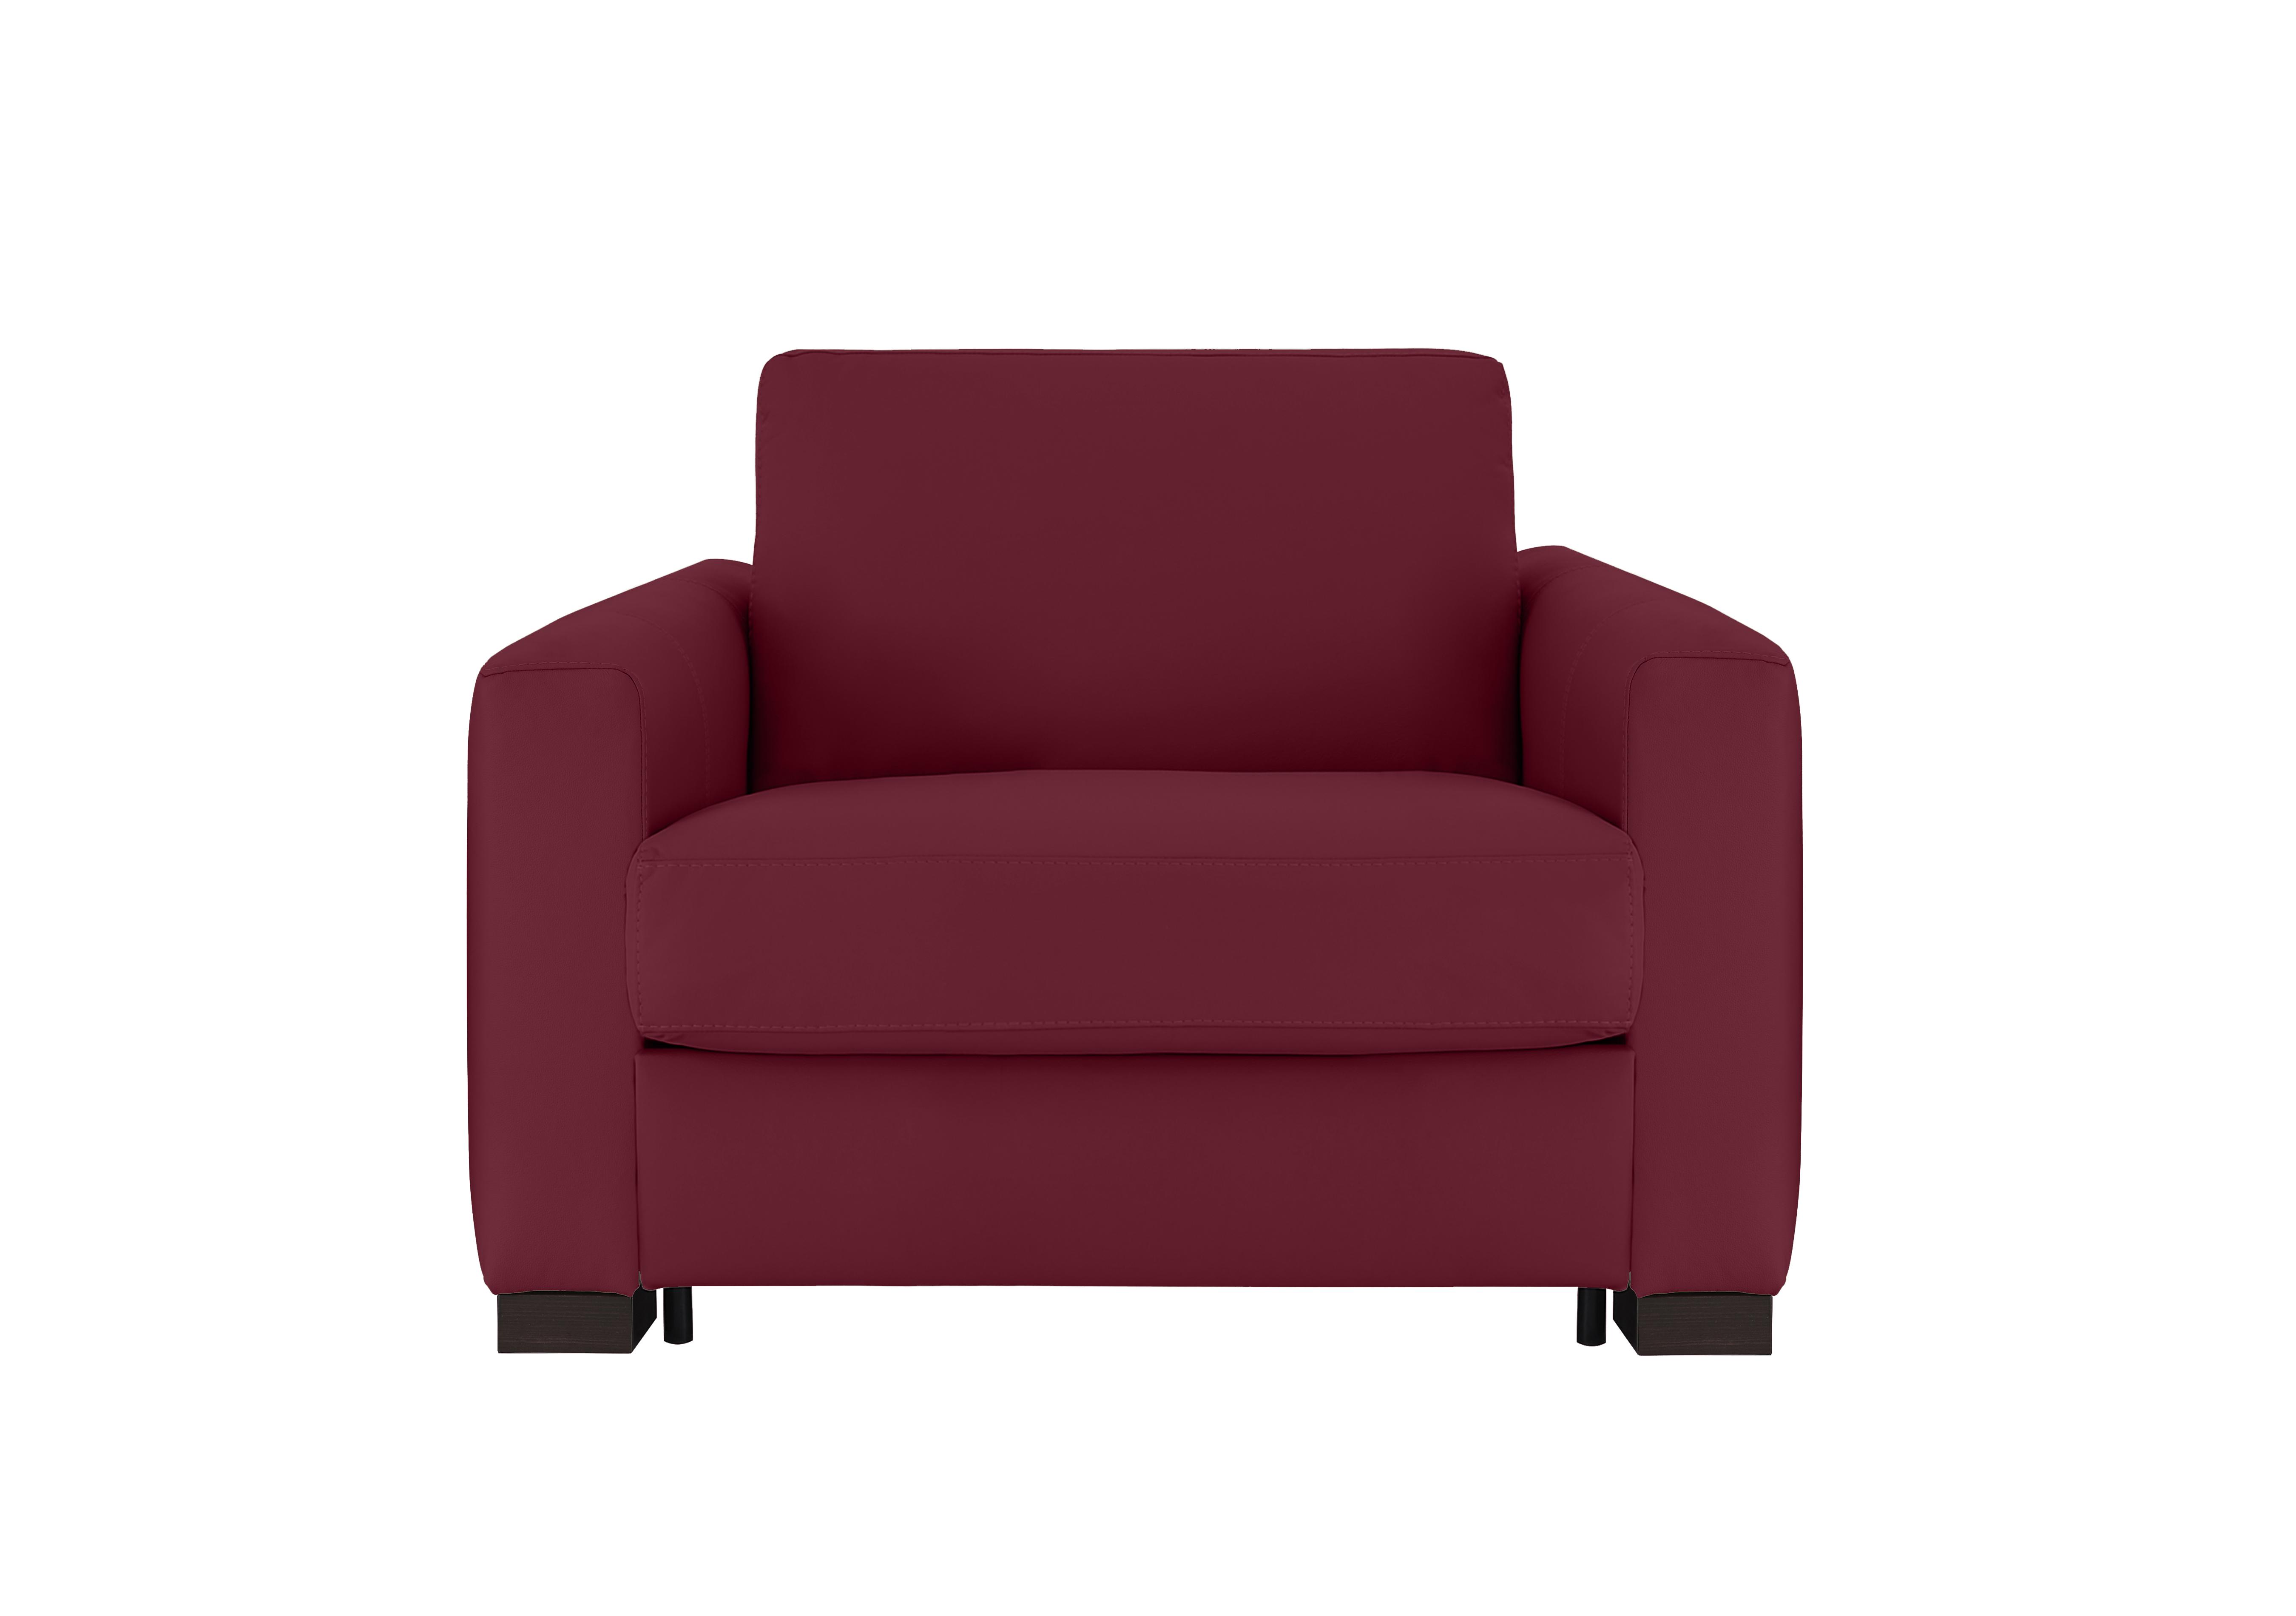 Alcova Leather Chair Sofa Bed with Box Arms in Dali Bordeaux 1521 on Furniture Village